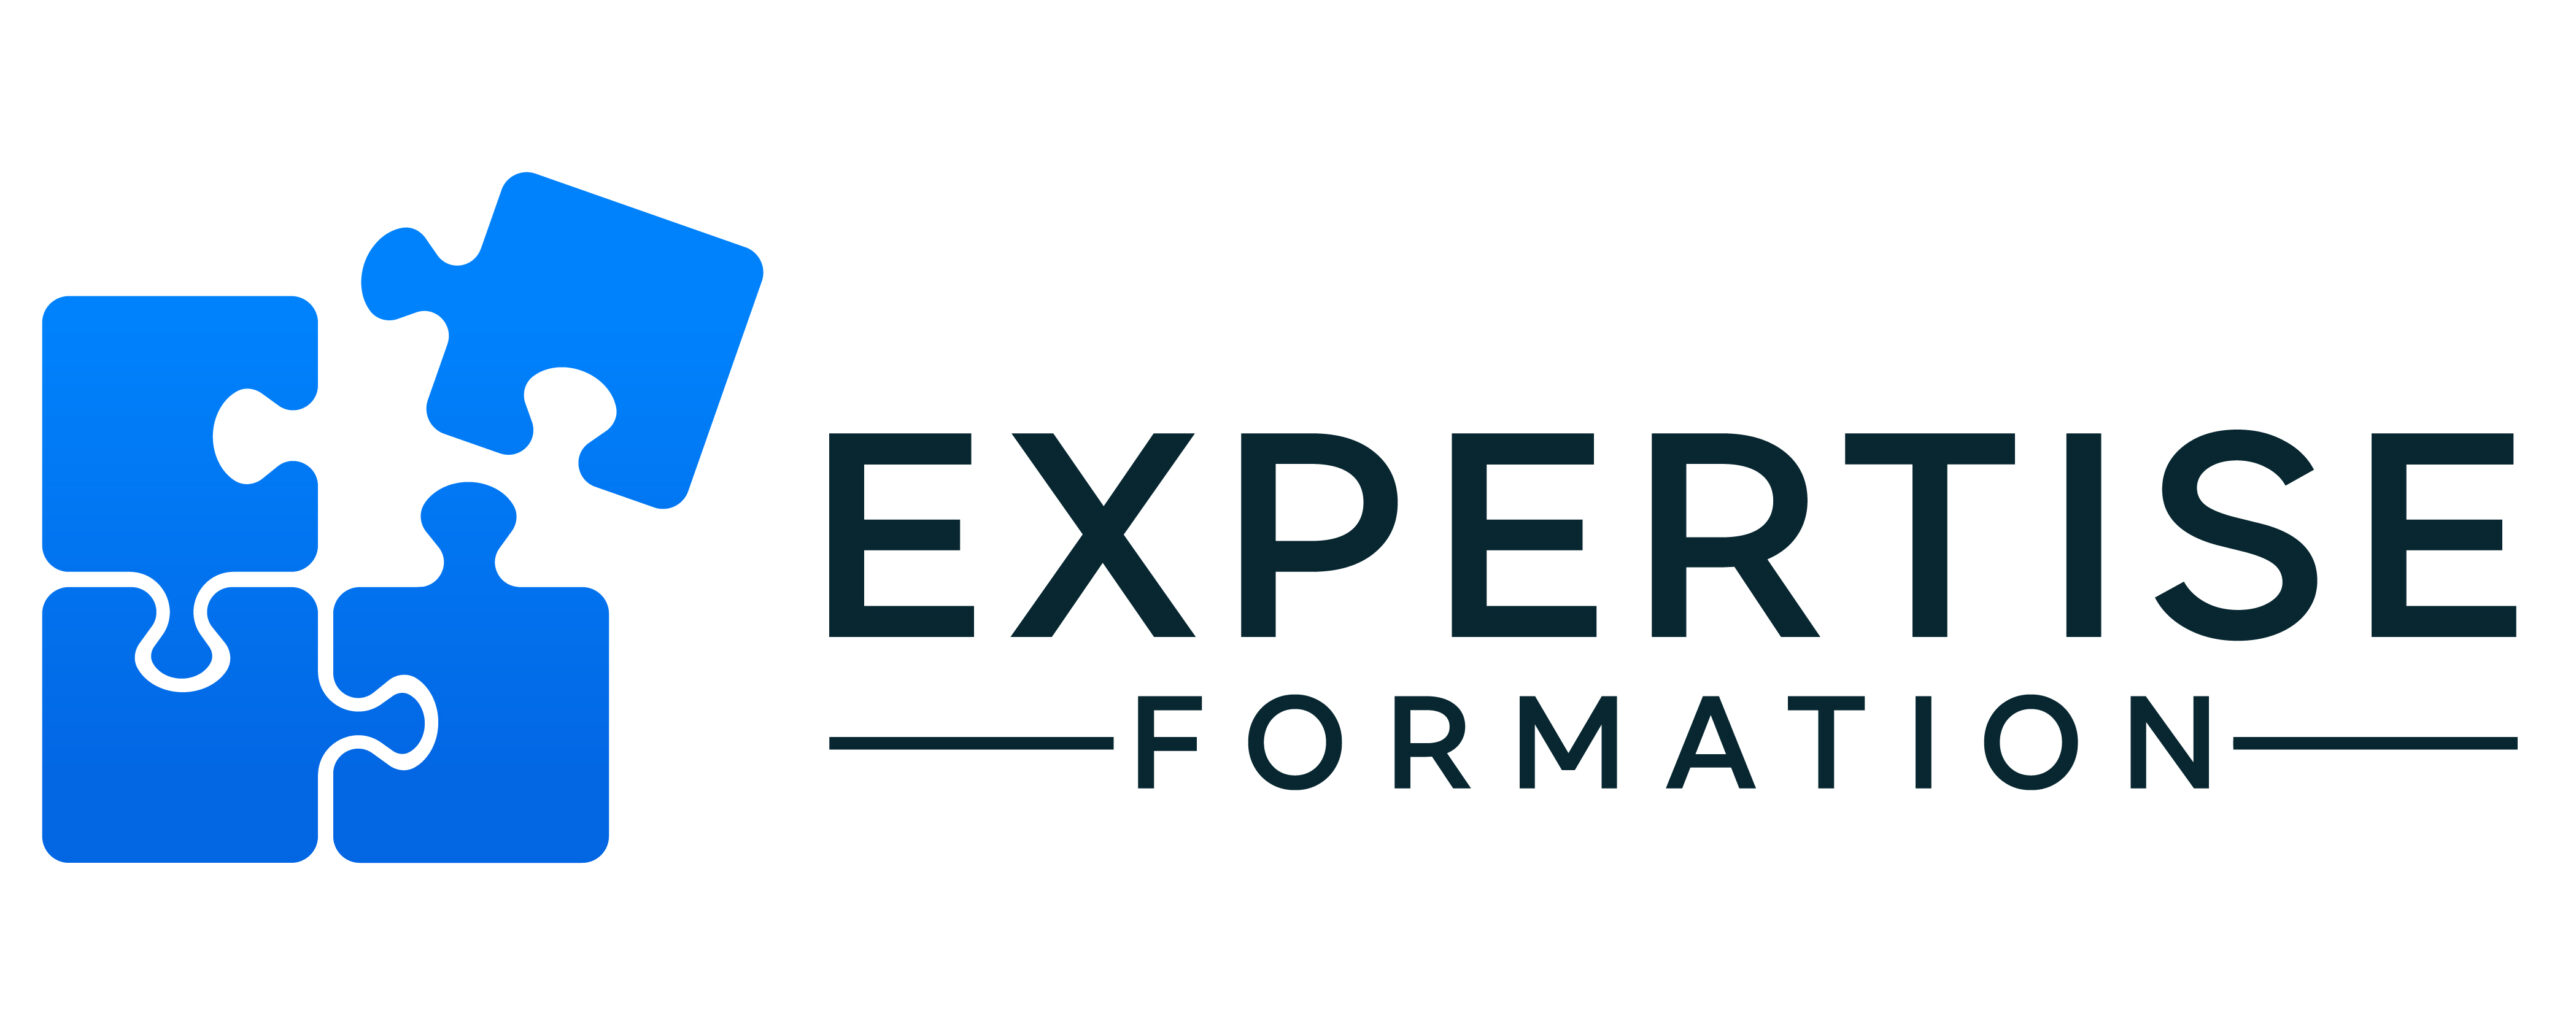 Expertise formation